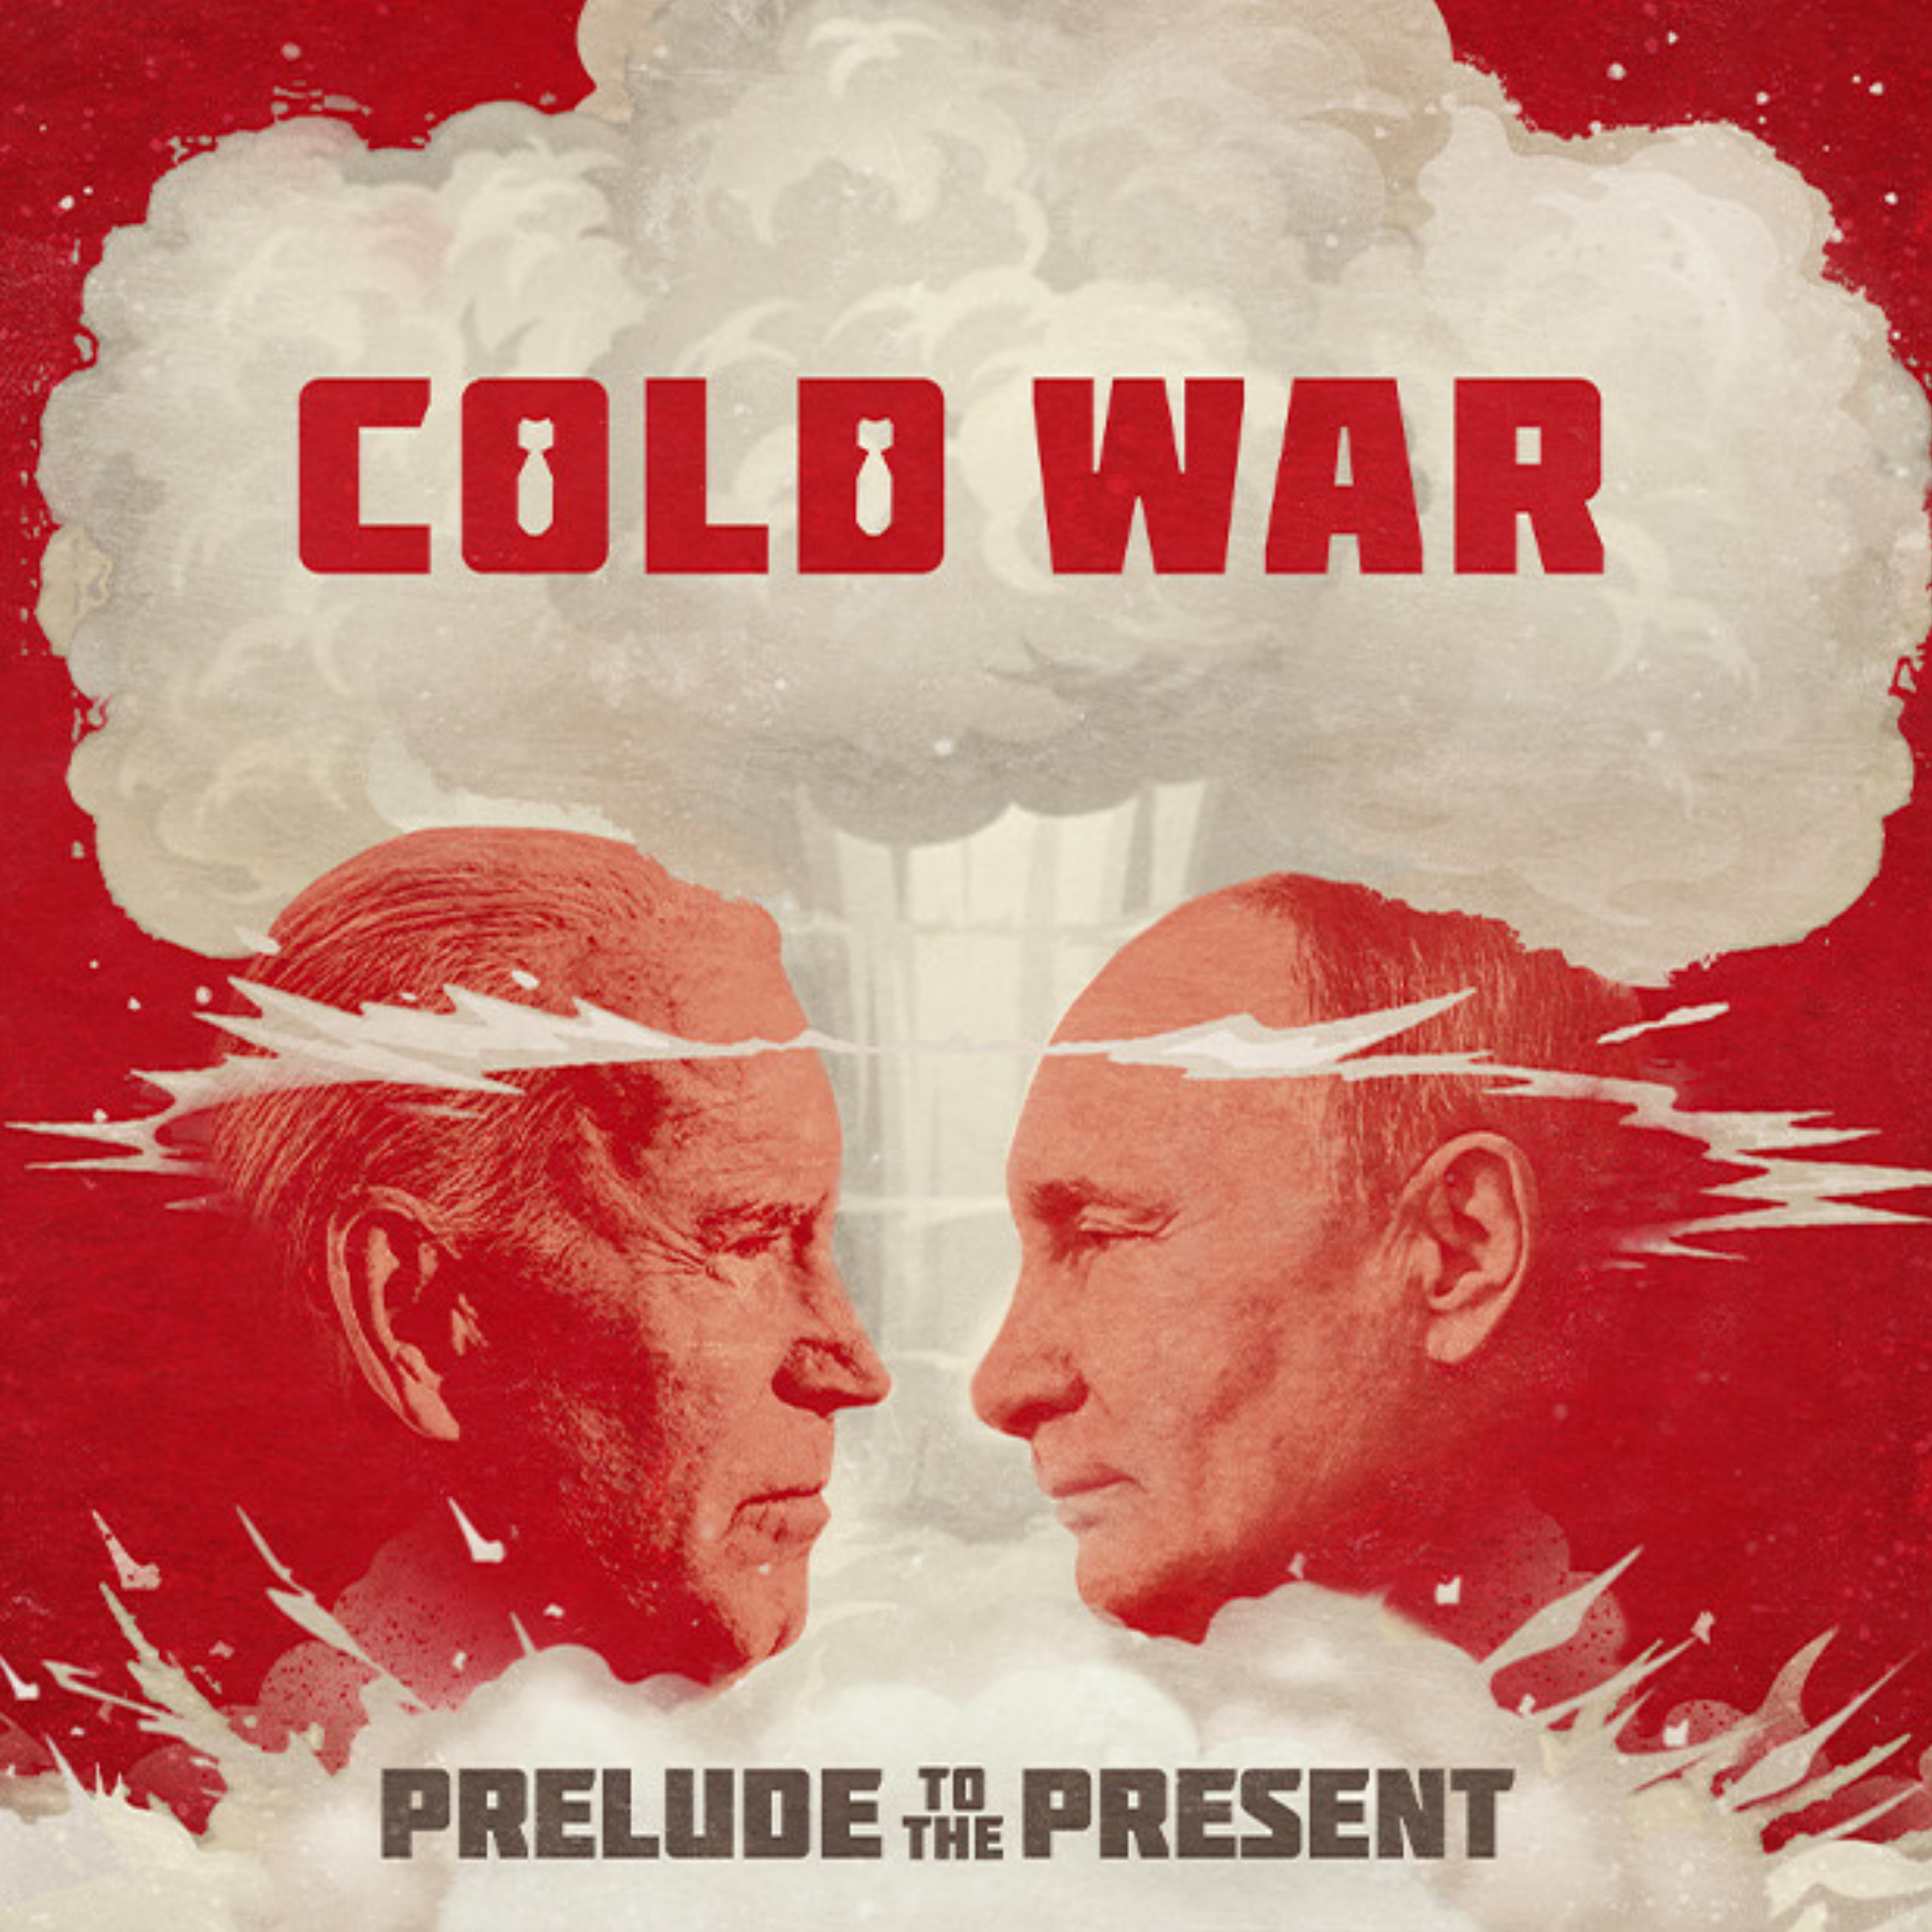 why was it called a cold war